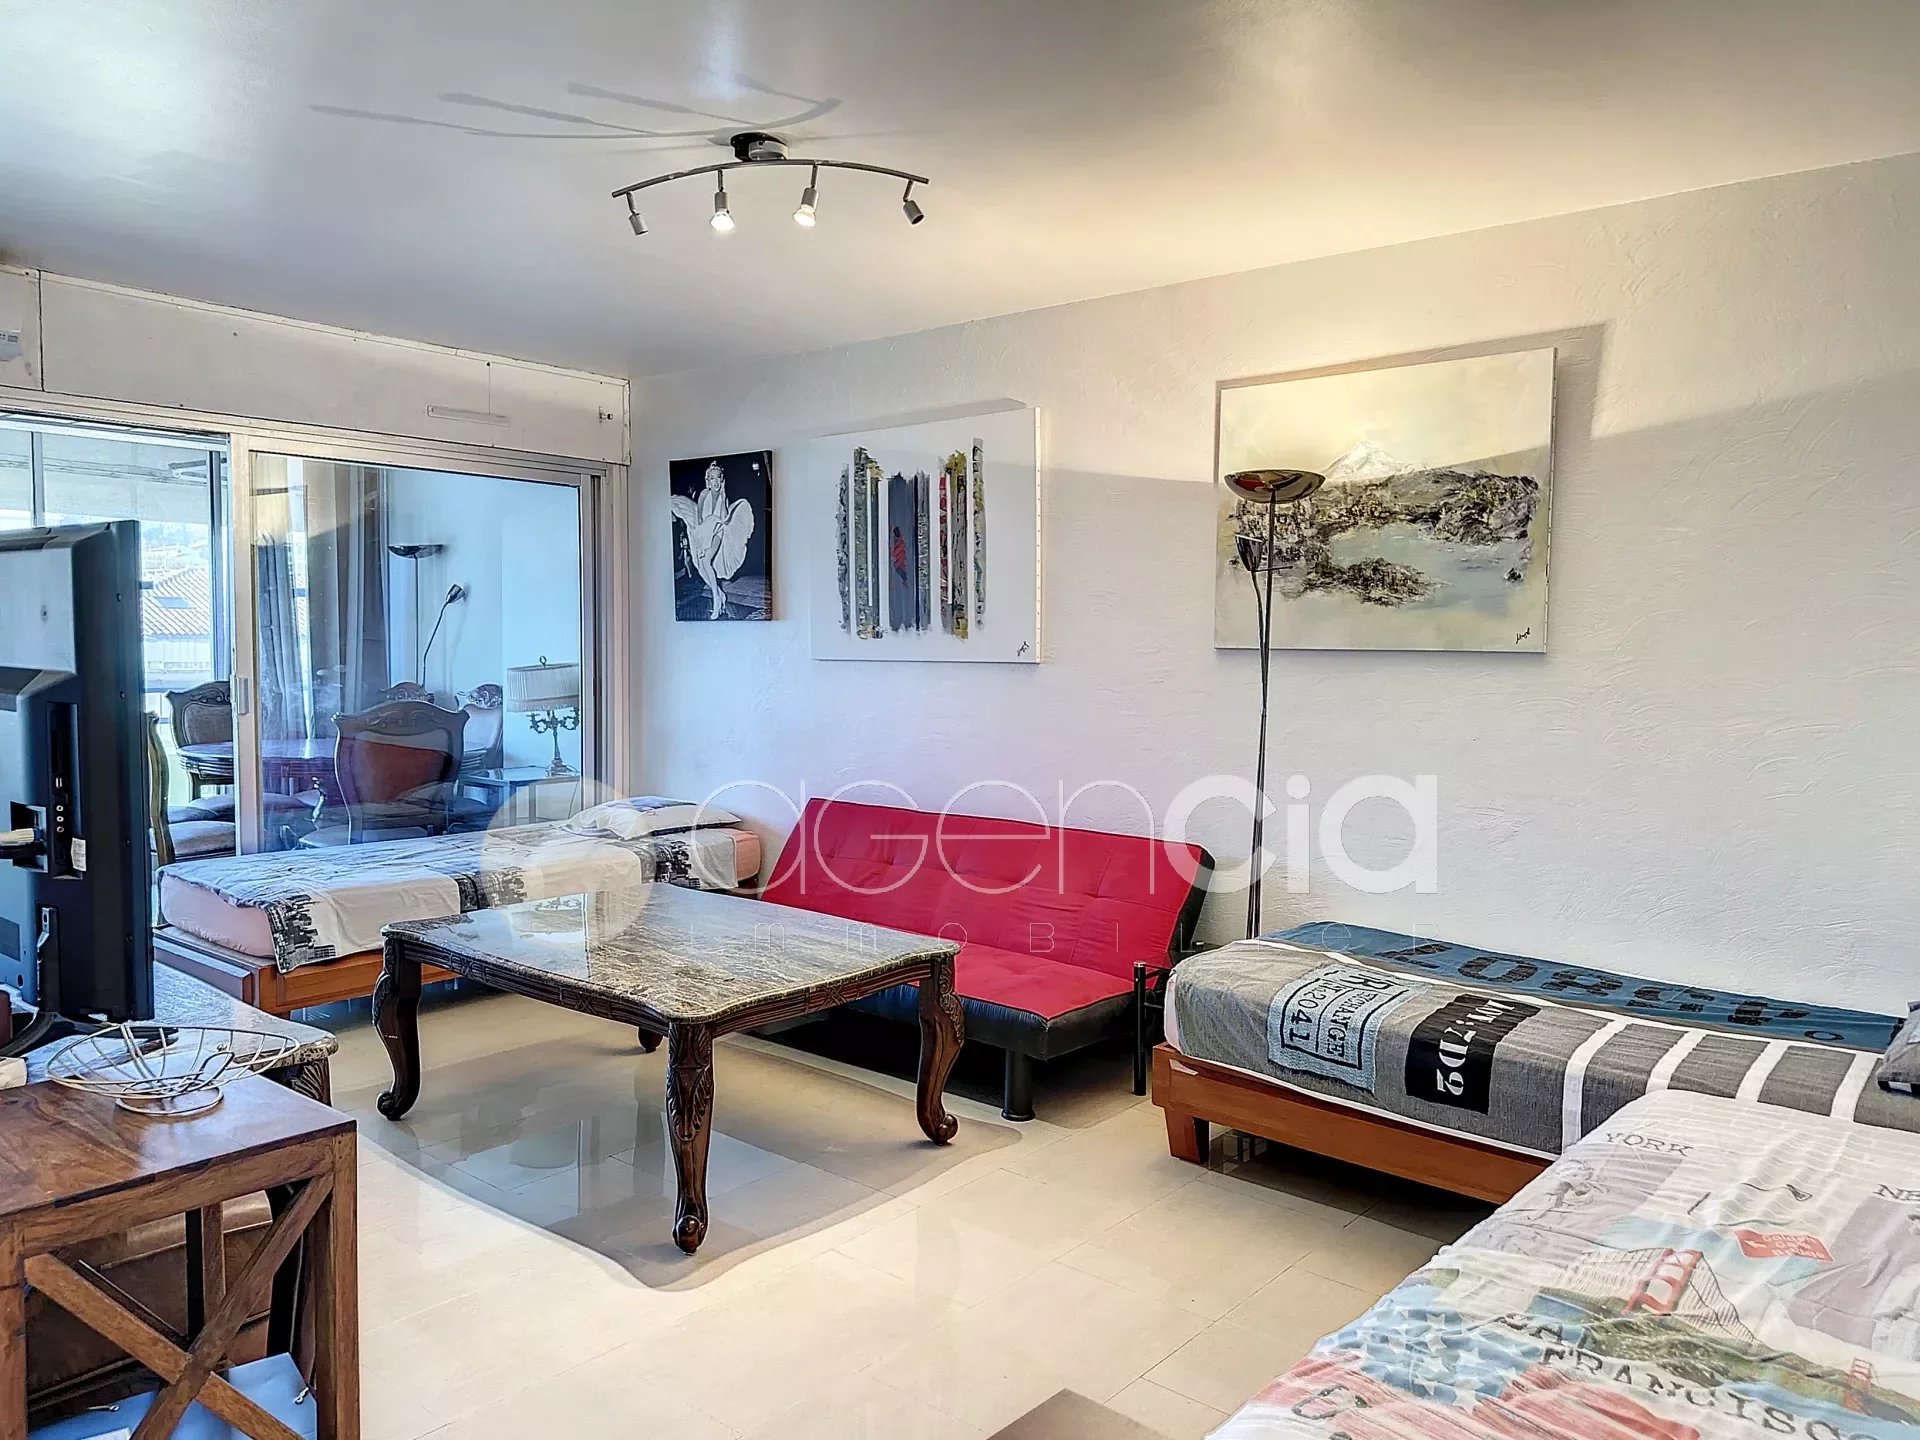 LARGE 2 ROOM APARTMENT IN DOWNTOWN CANNES - LUXURY RESIDENCE